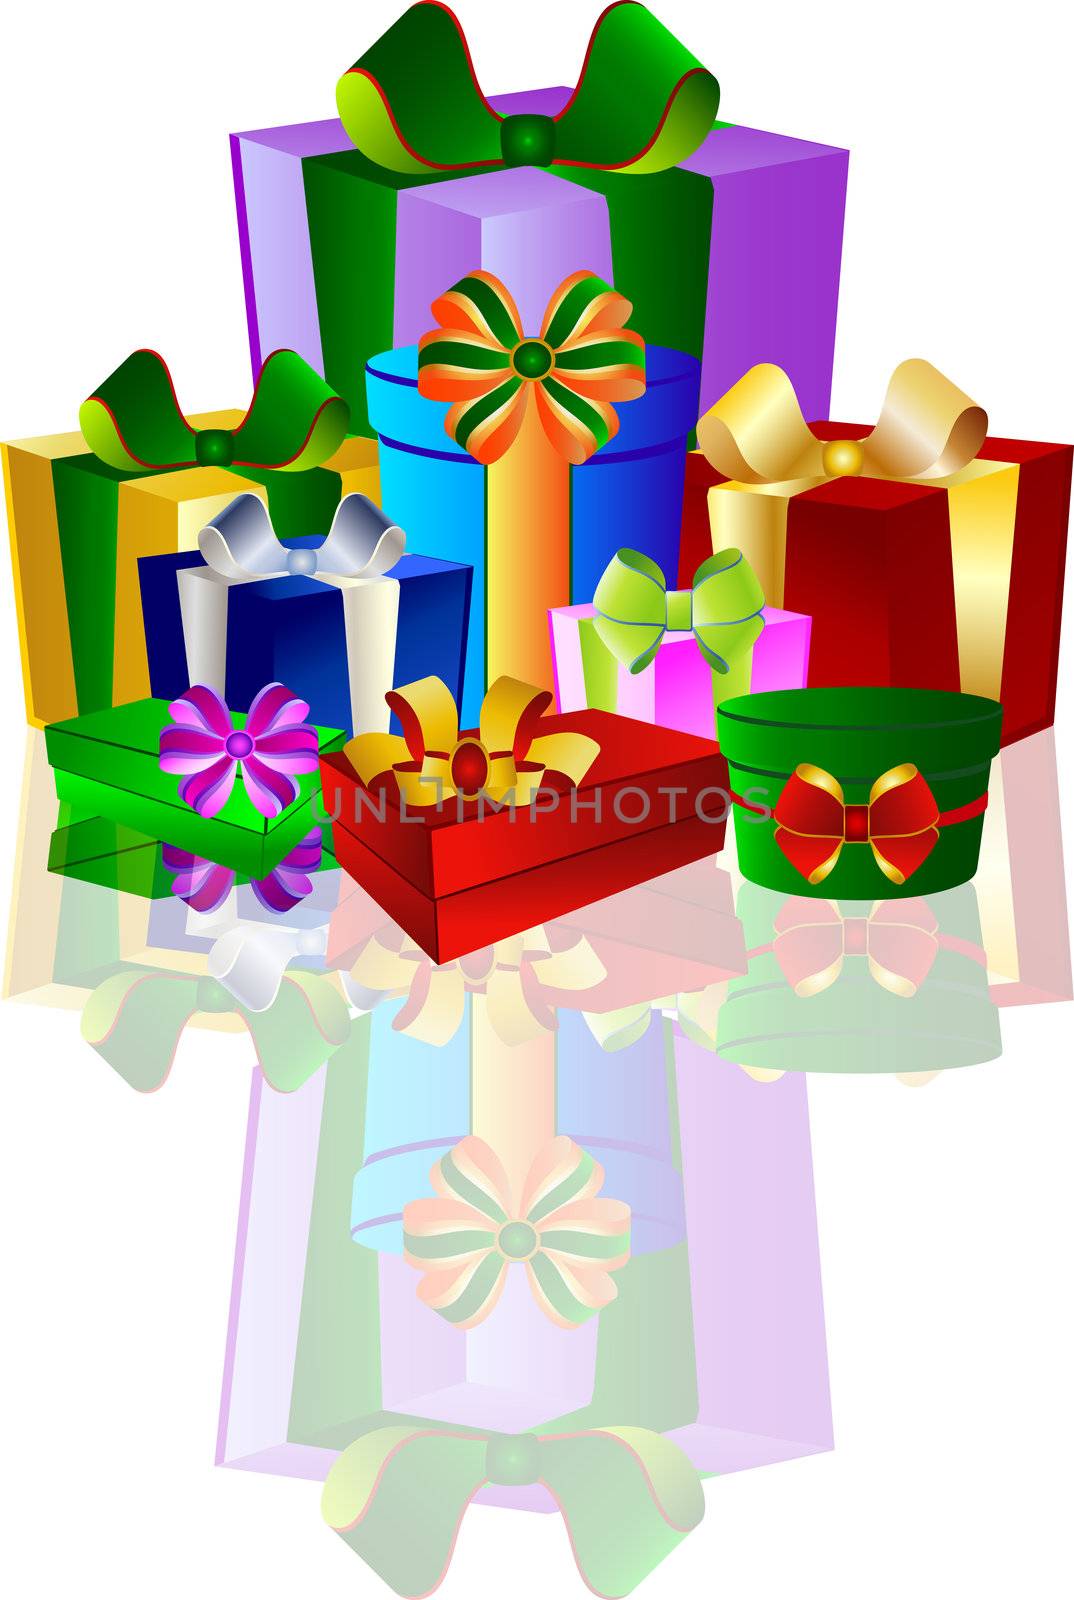 Colorful Gift Boxes on white Background